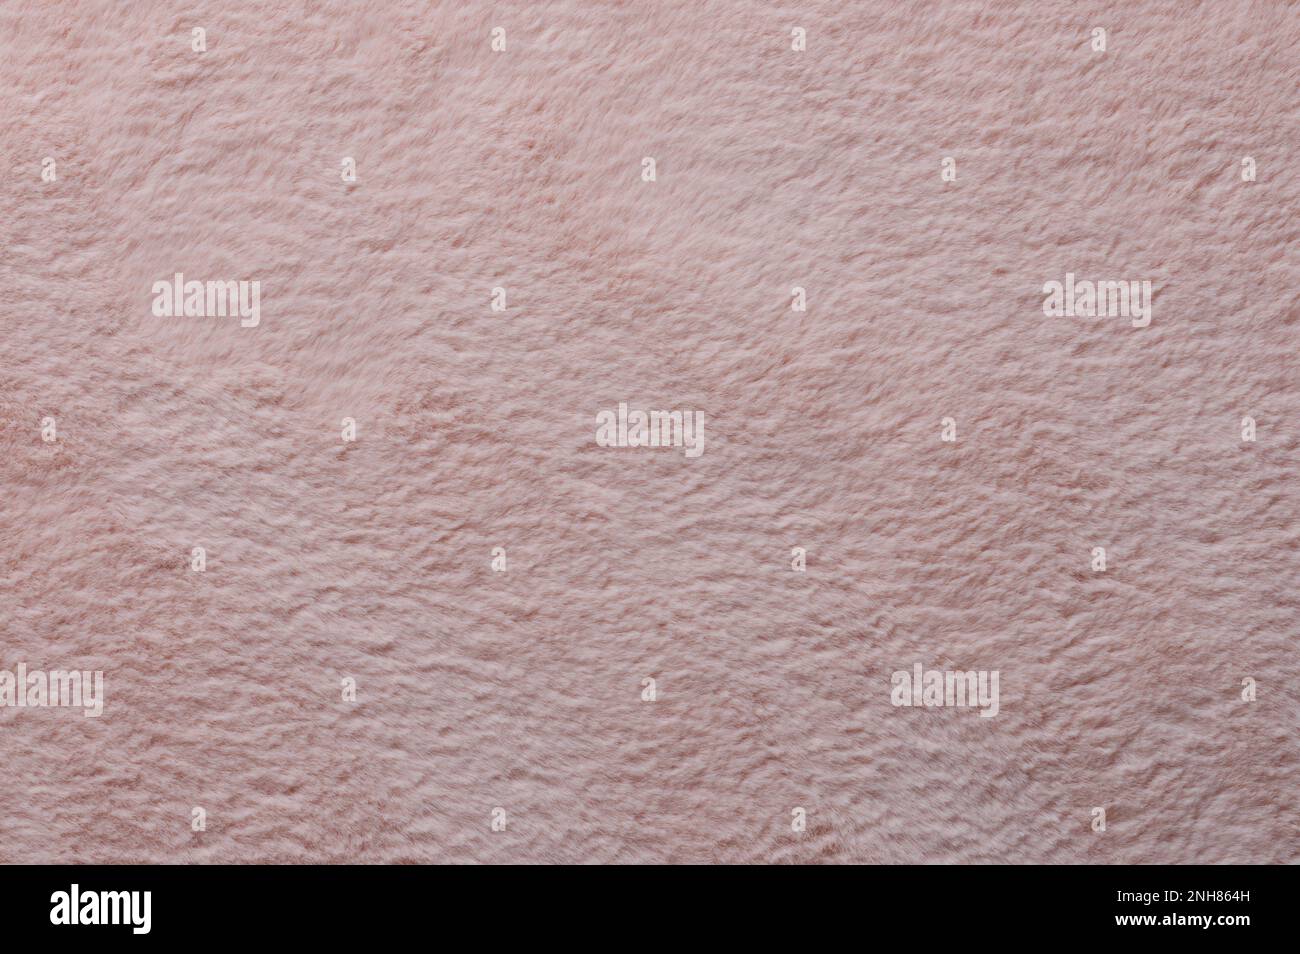 Fluffy pink cotton surface. Smooth clean soft texture Stock Photo